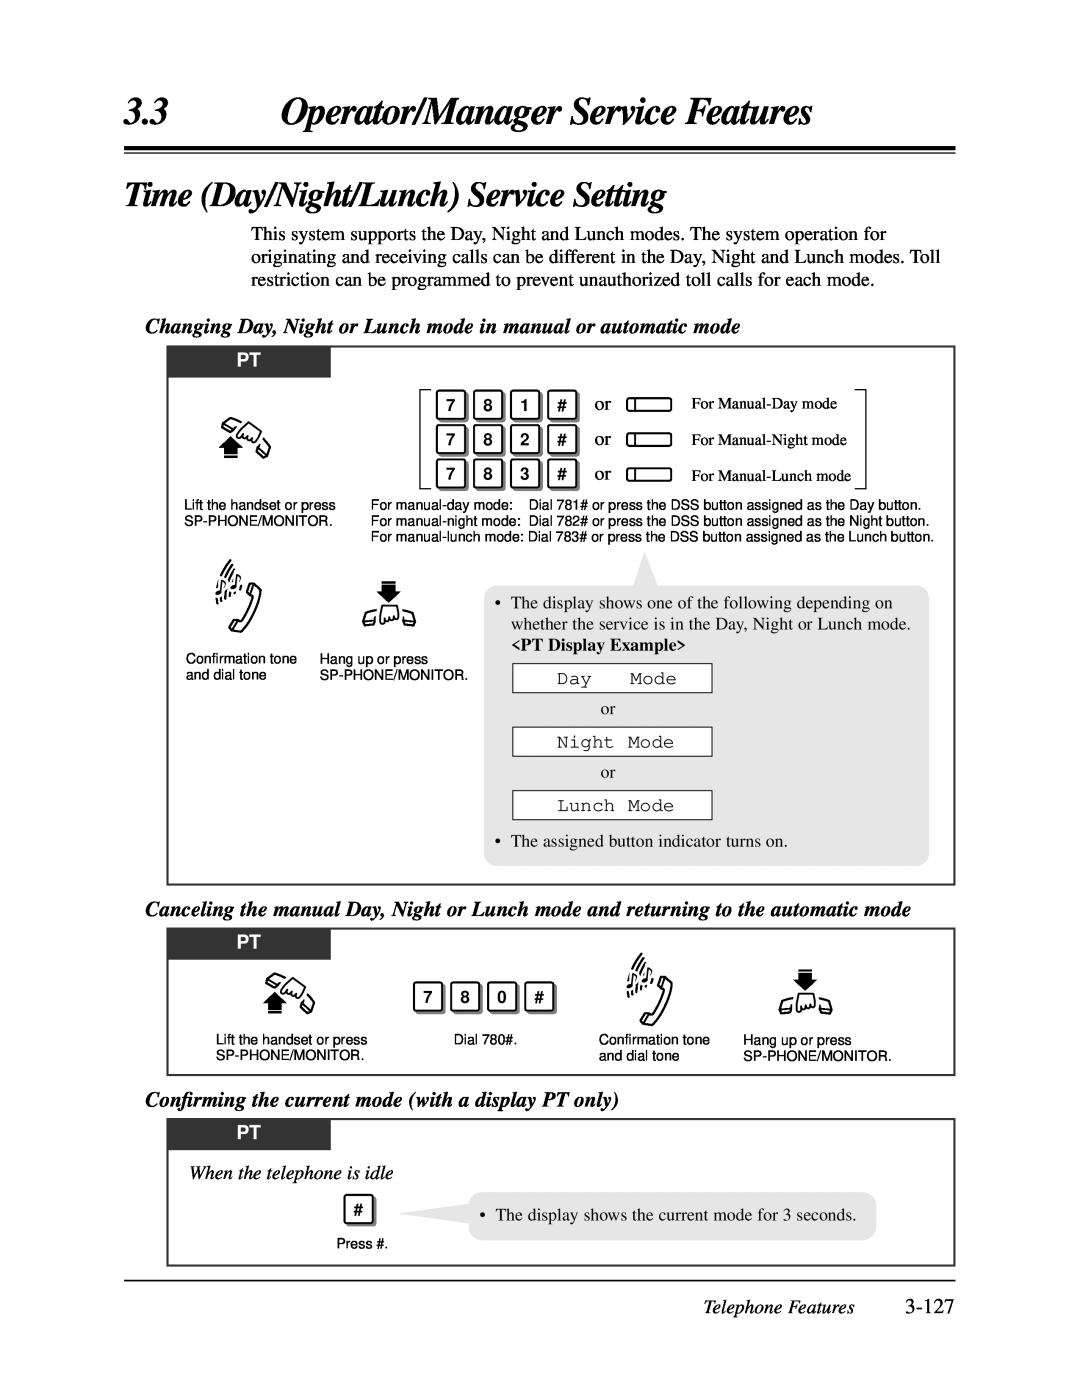 Panasonic KX-TA624 user manual Time Day/Night/Lunch Service Setting, 3-127, Operator/Manager Service Features 